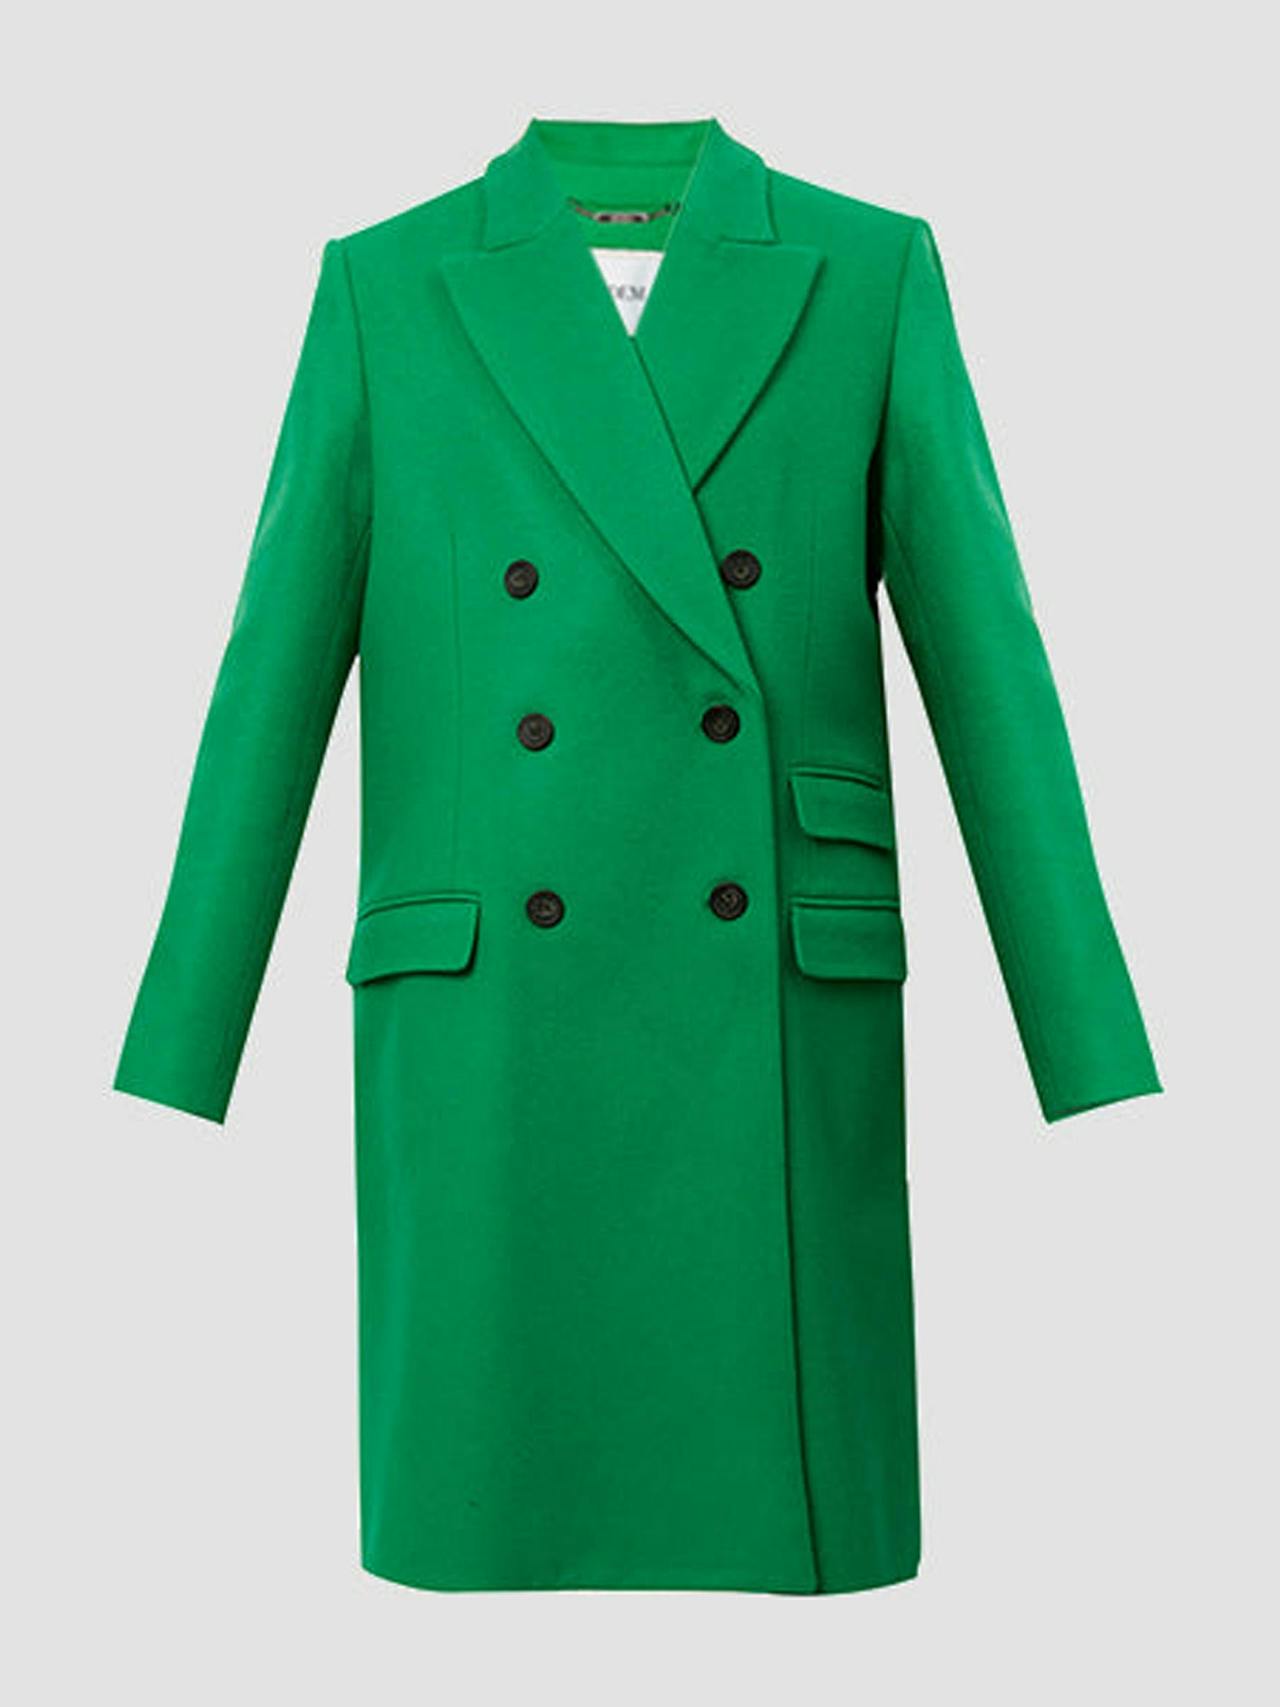 Green double breasted coat